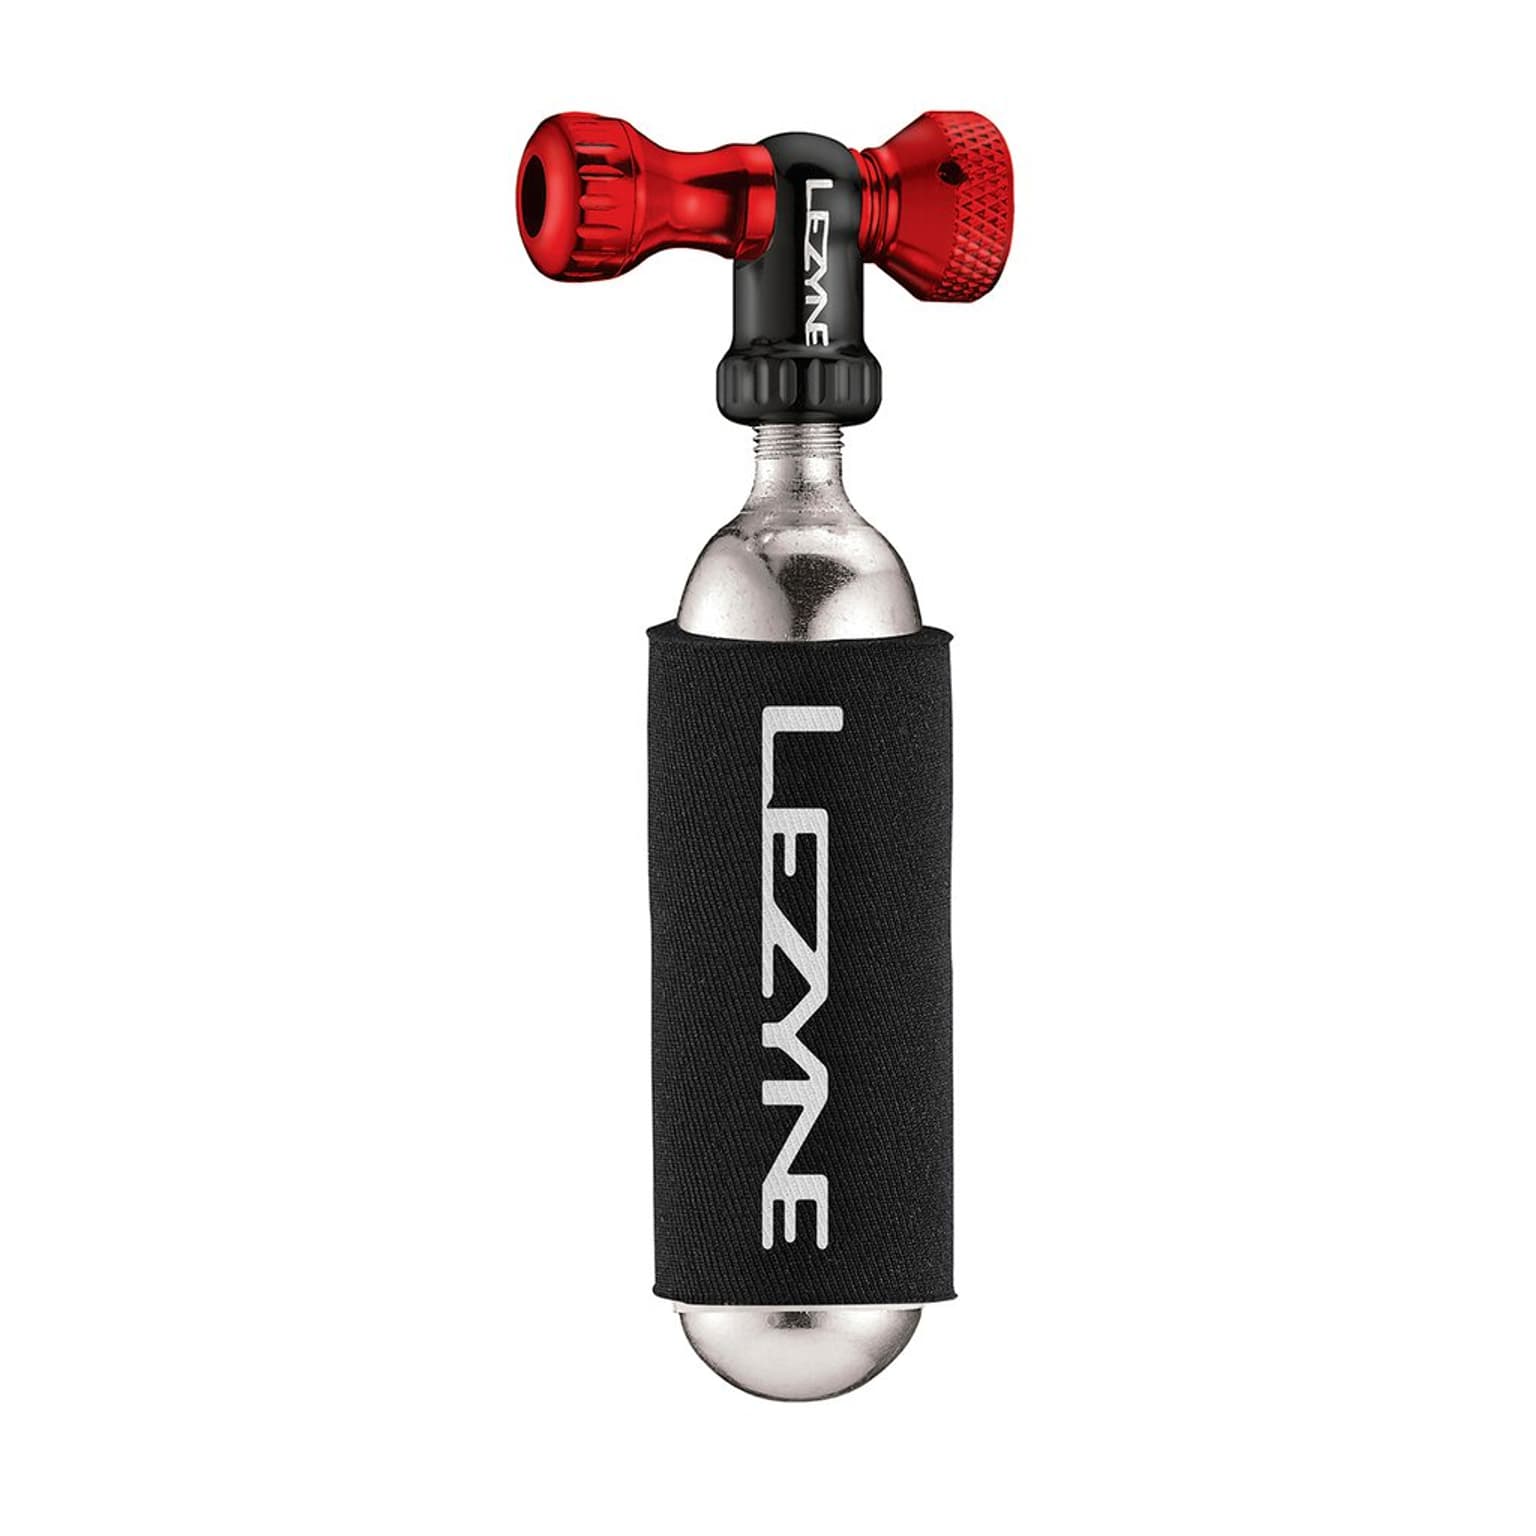 Lezyne Lezyne Control Drive CO2 With 16G Cartridge Pompa per bici rosso 1